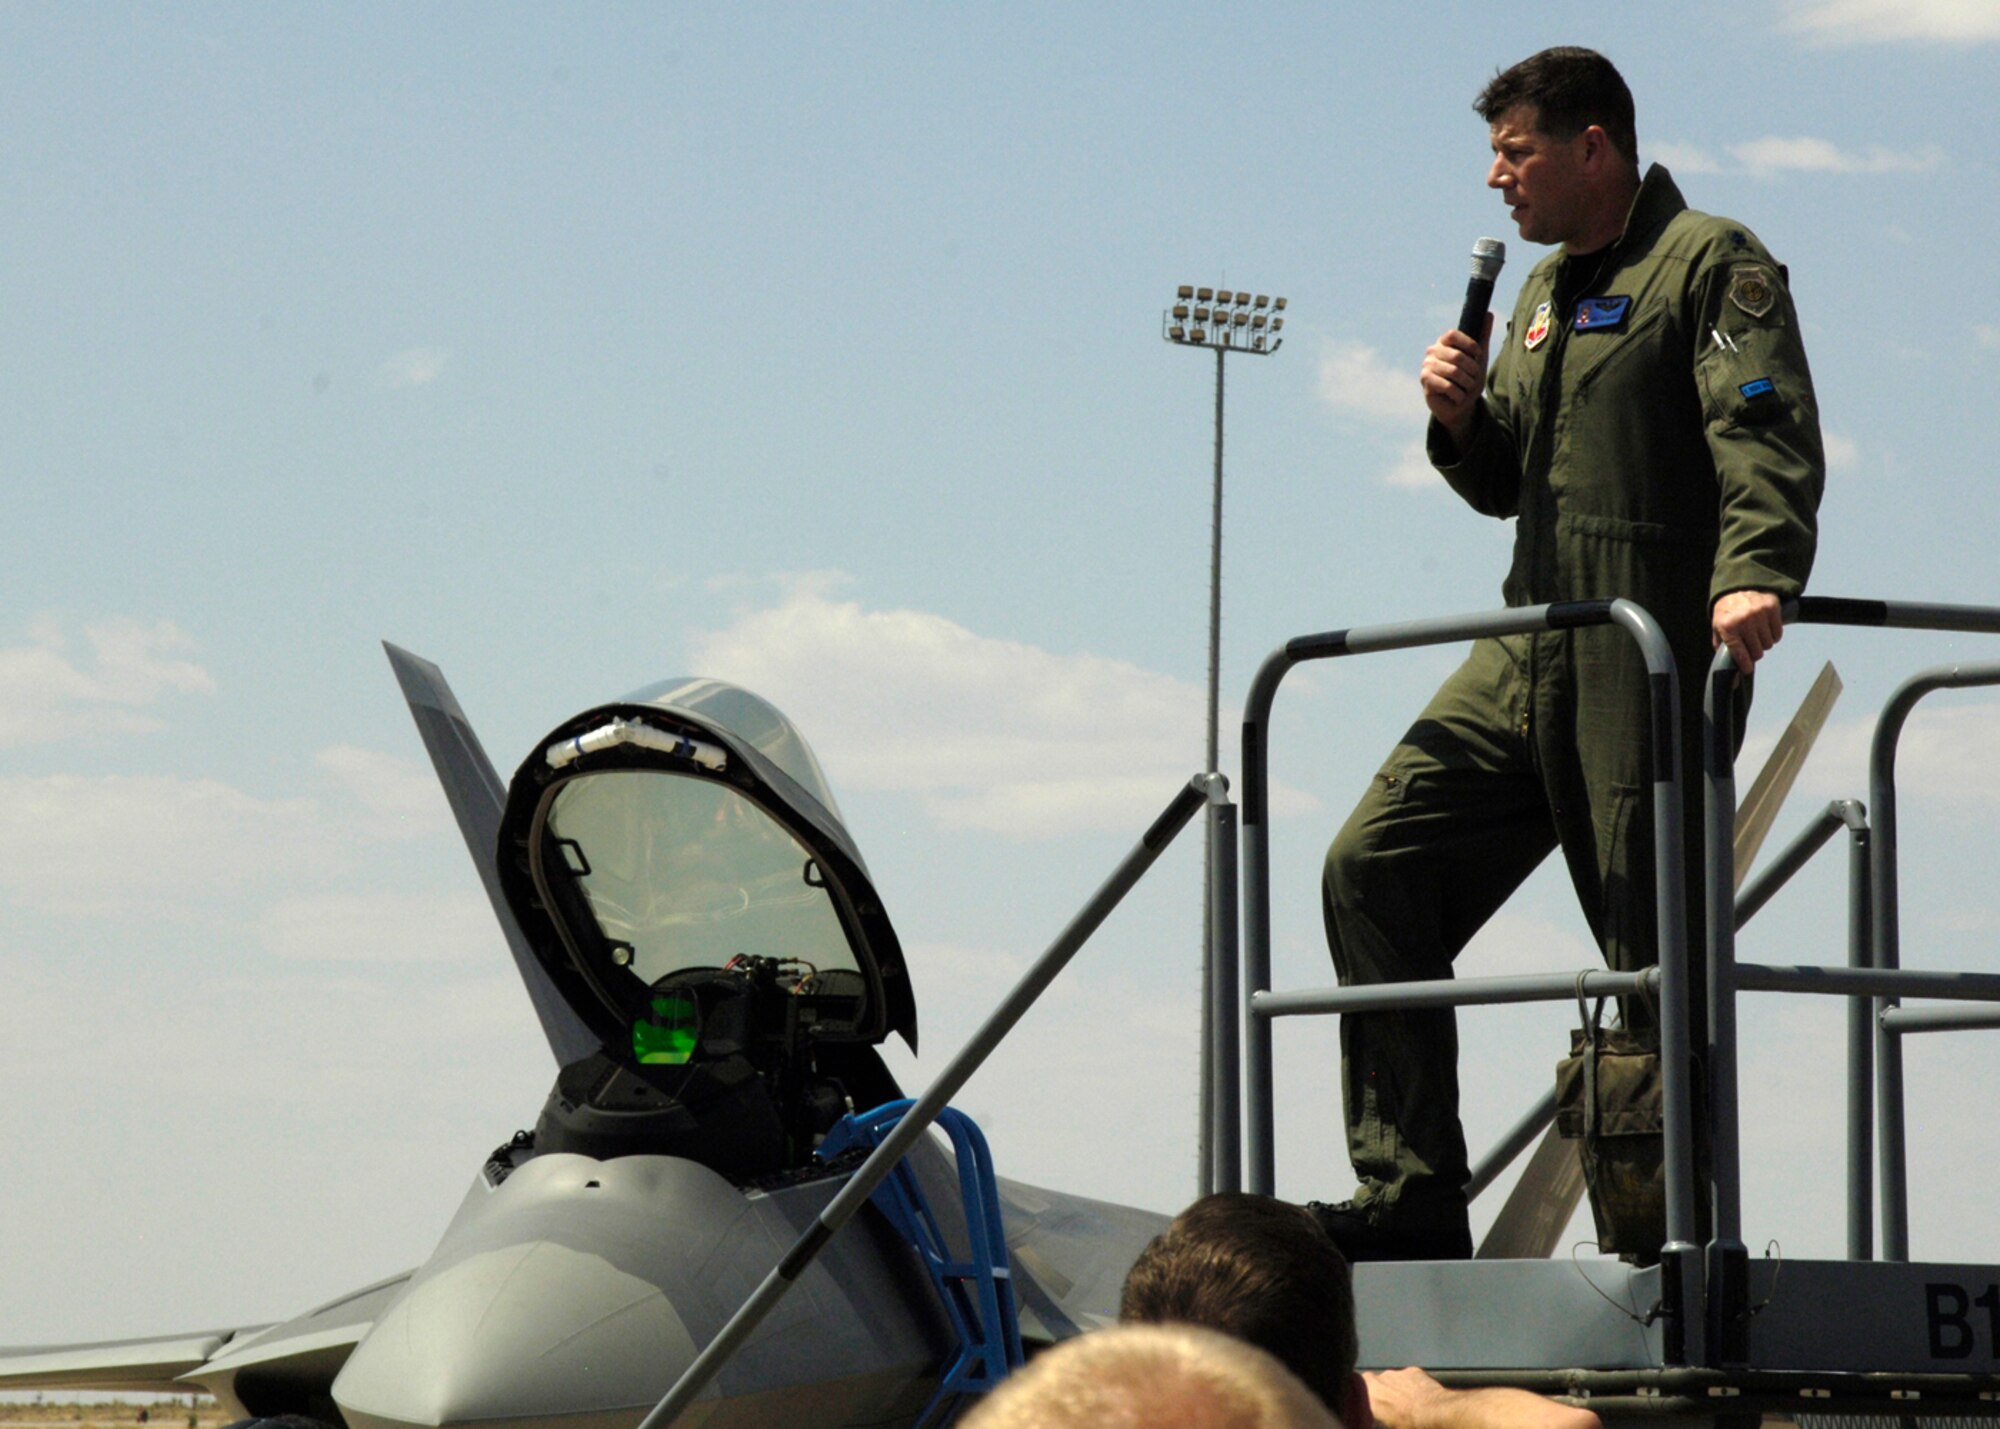 Lt. Col. Mike ?PigPen? Hernandez, 7th Fighter Squadron commander, speaks to the crowd after the arrival of Holloman?s first two F-22A Raptors. Colonel Hernandez and Col. Jeff ?Cobra? Harrigian, 49th Fighter Wing commander, land the F-22?s near Hangar 301 at Holloman Air Force Base, N.M., June 2. (U.S. Air Force photo/Airman 1st Class Michael Means)